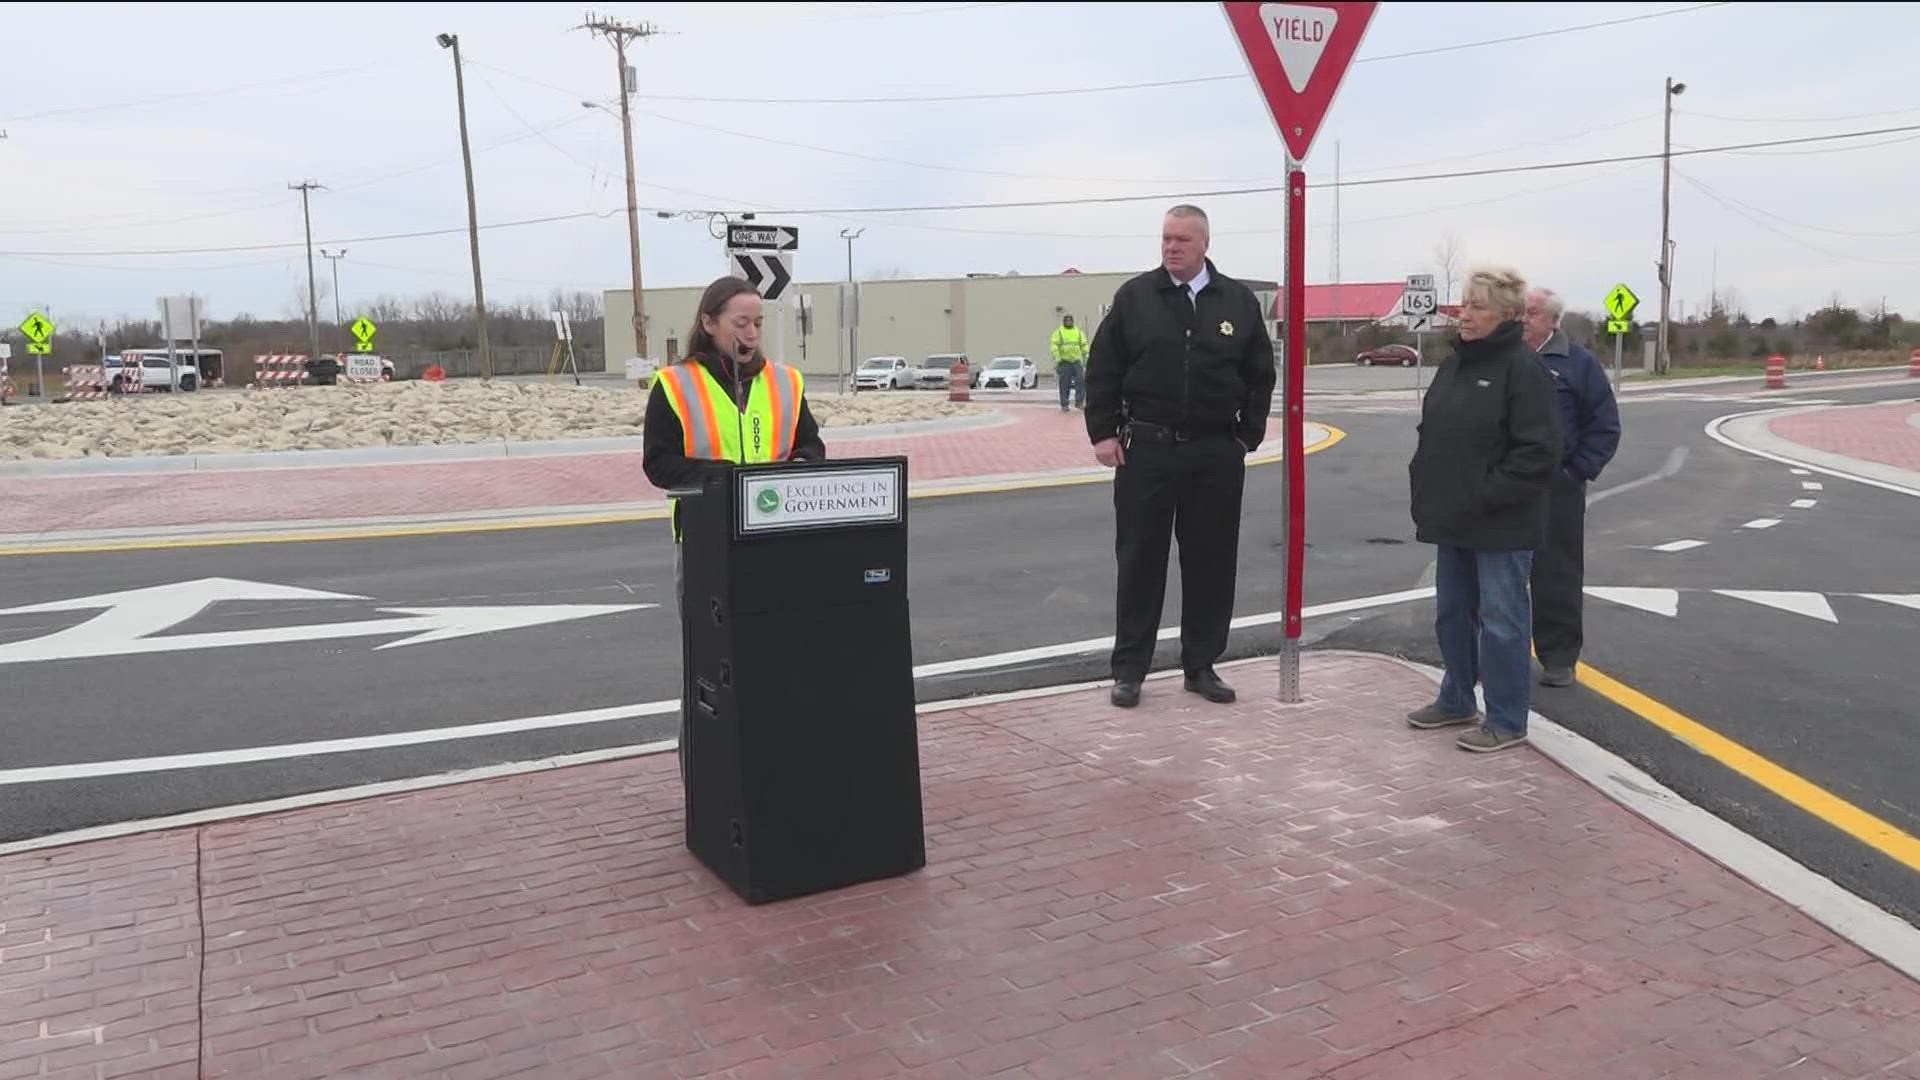 Traffic officials expect the roundabout to make the intersection of SR 163 and N. Shore Boulevard safer and more efficient.